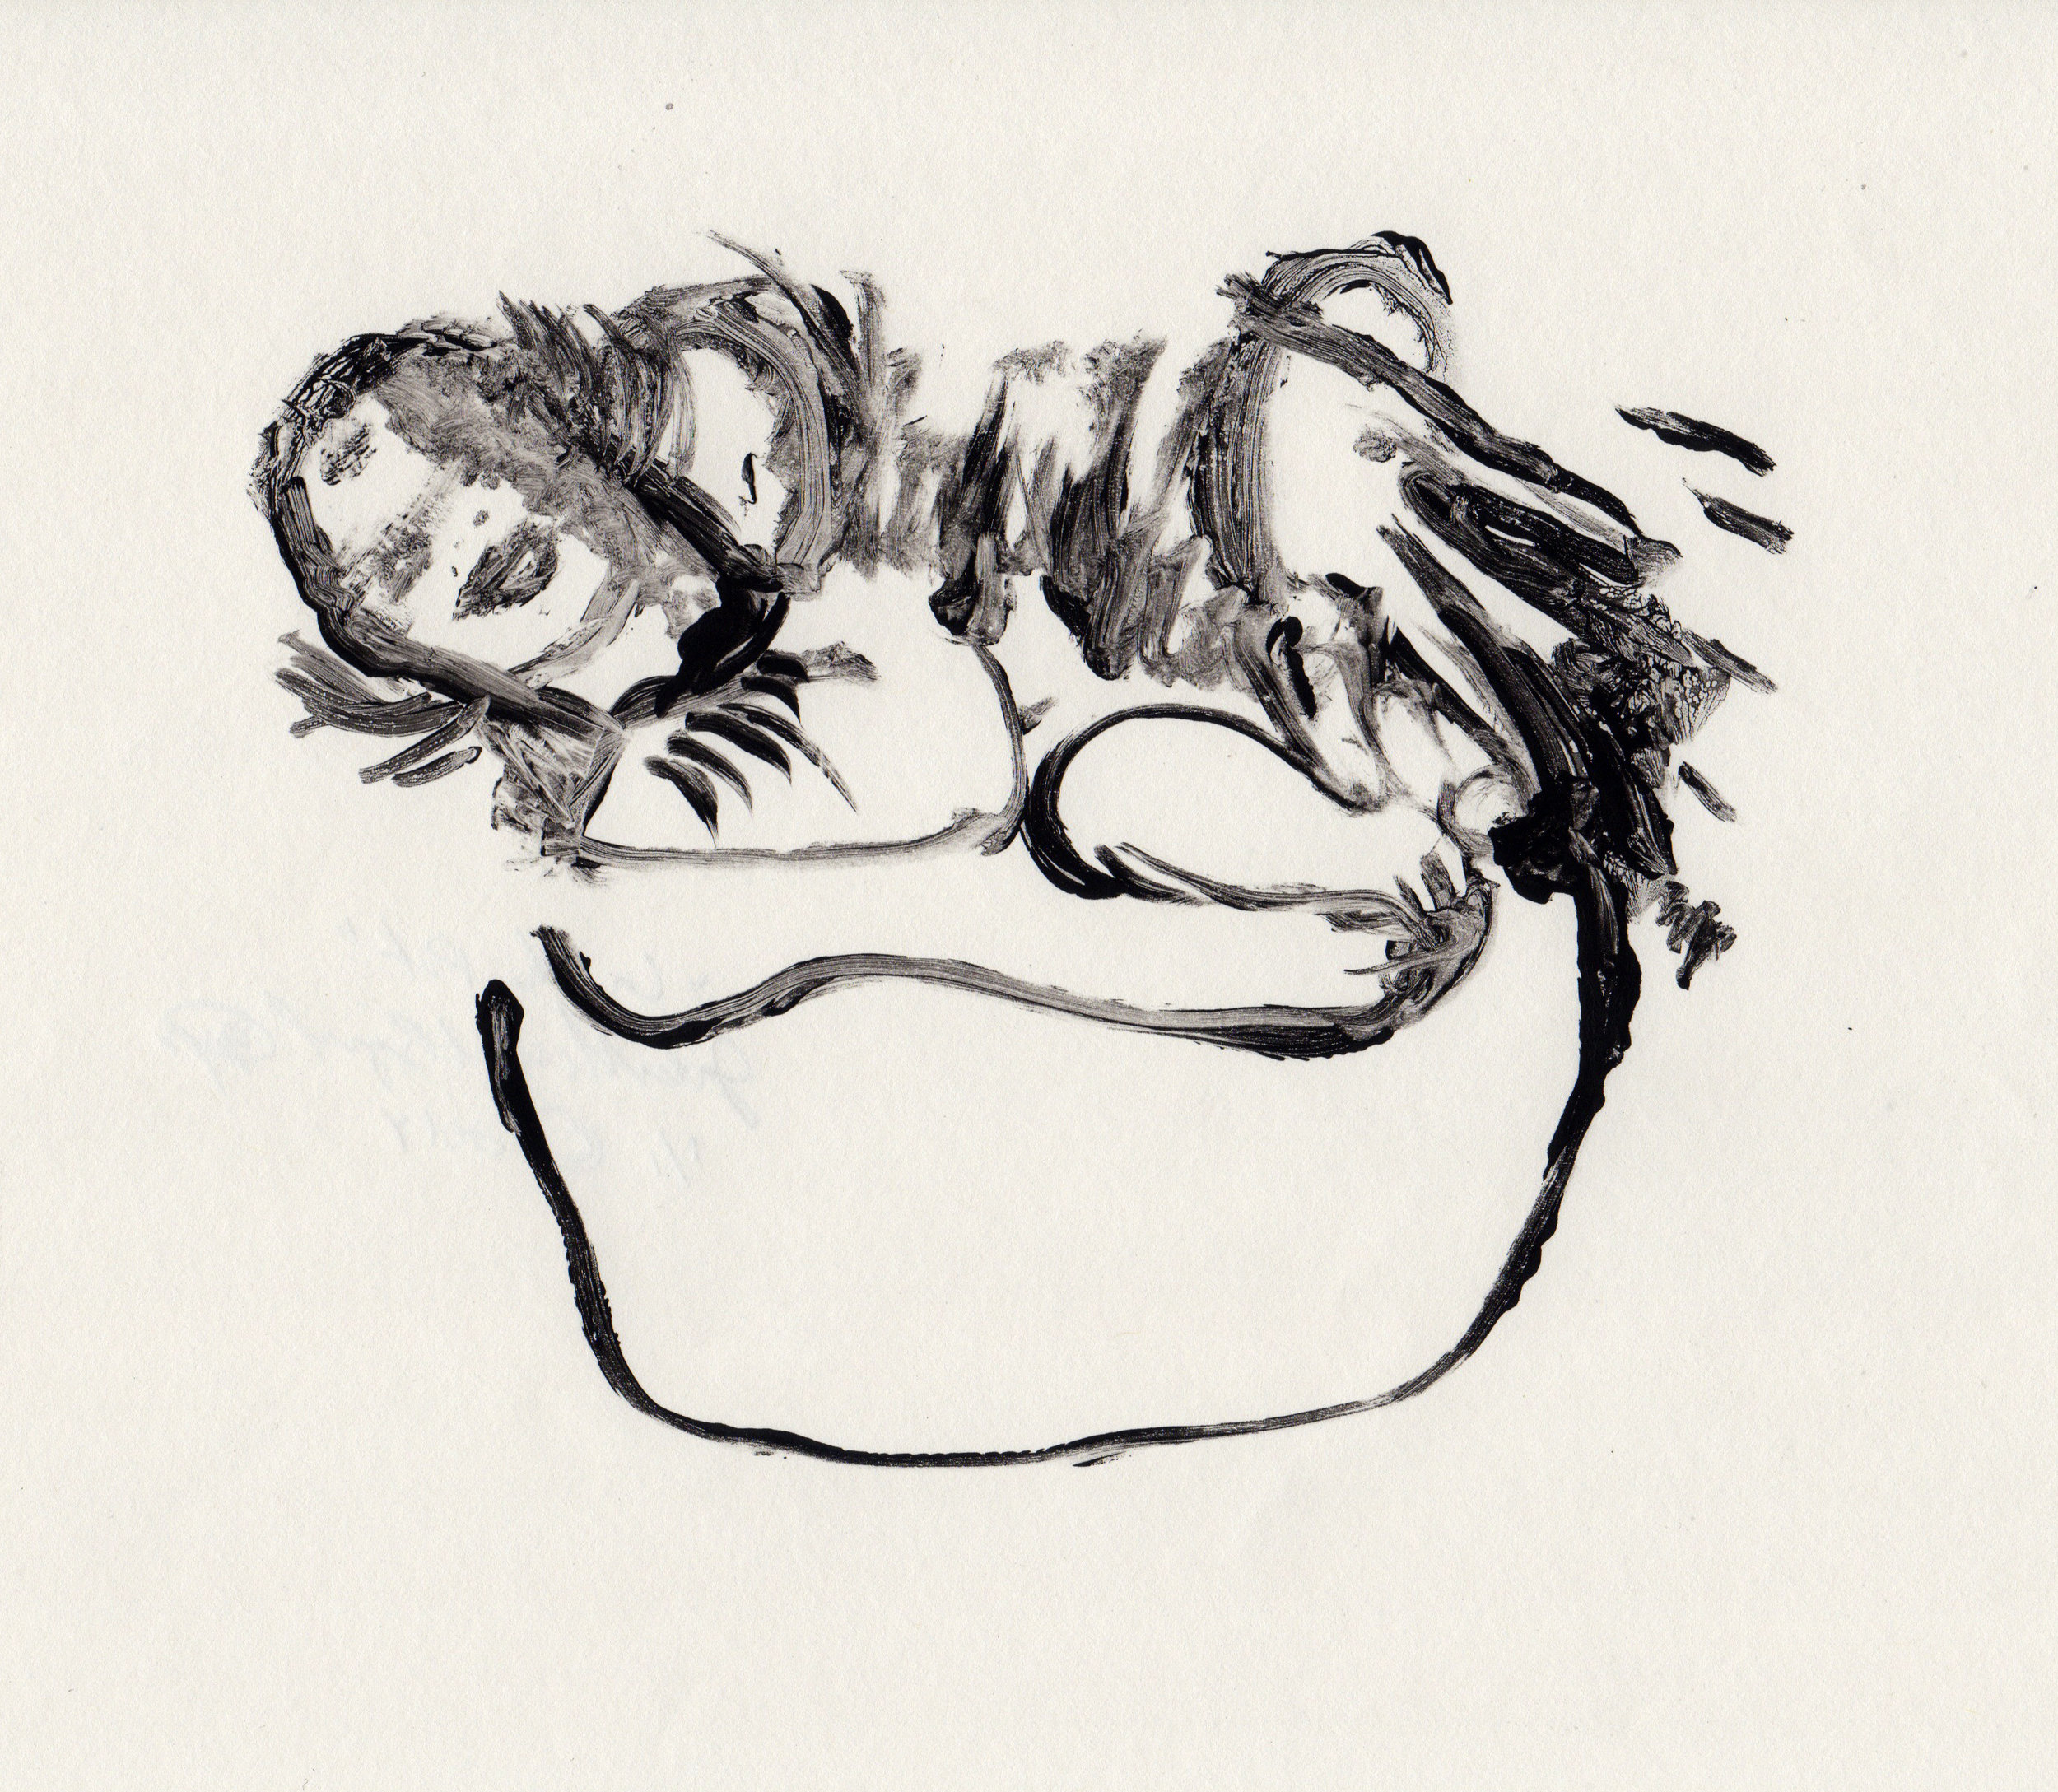 In The Pot, 2014, gelatin monotype, 10x9 inches